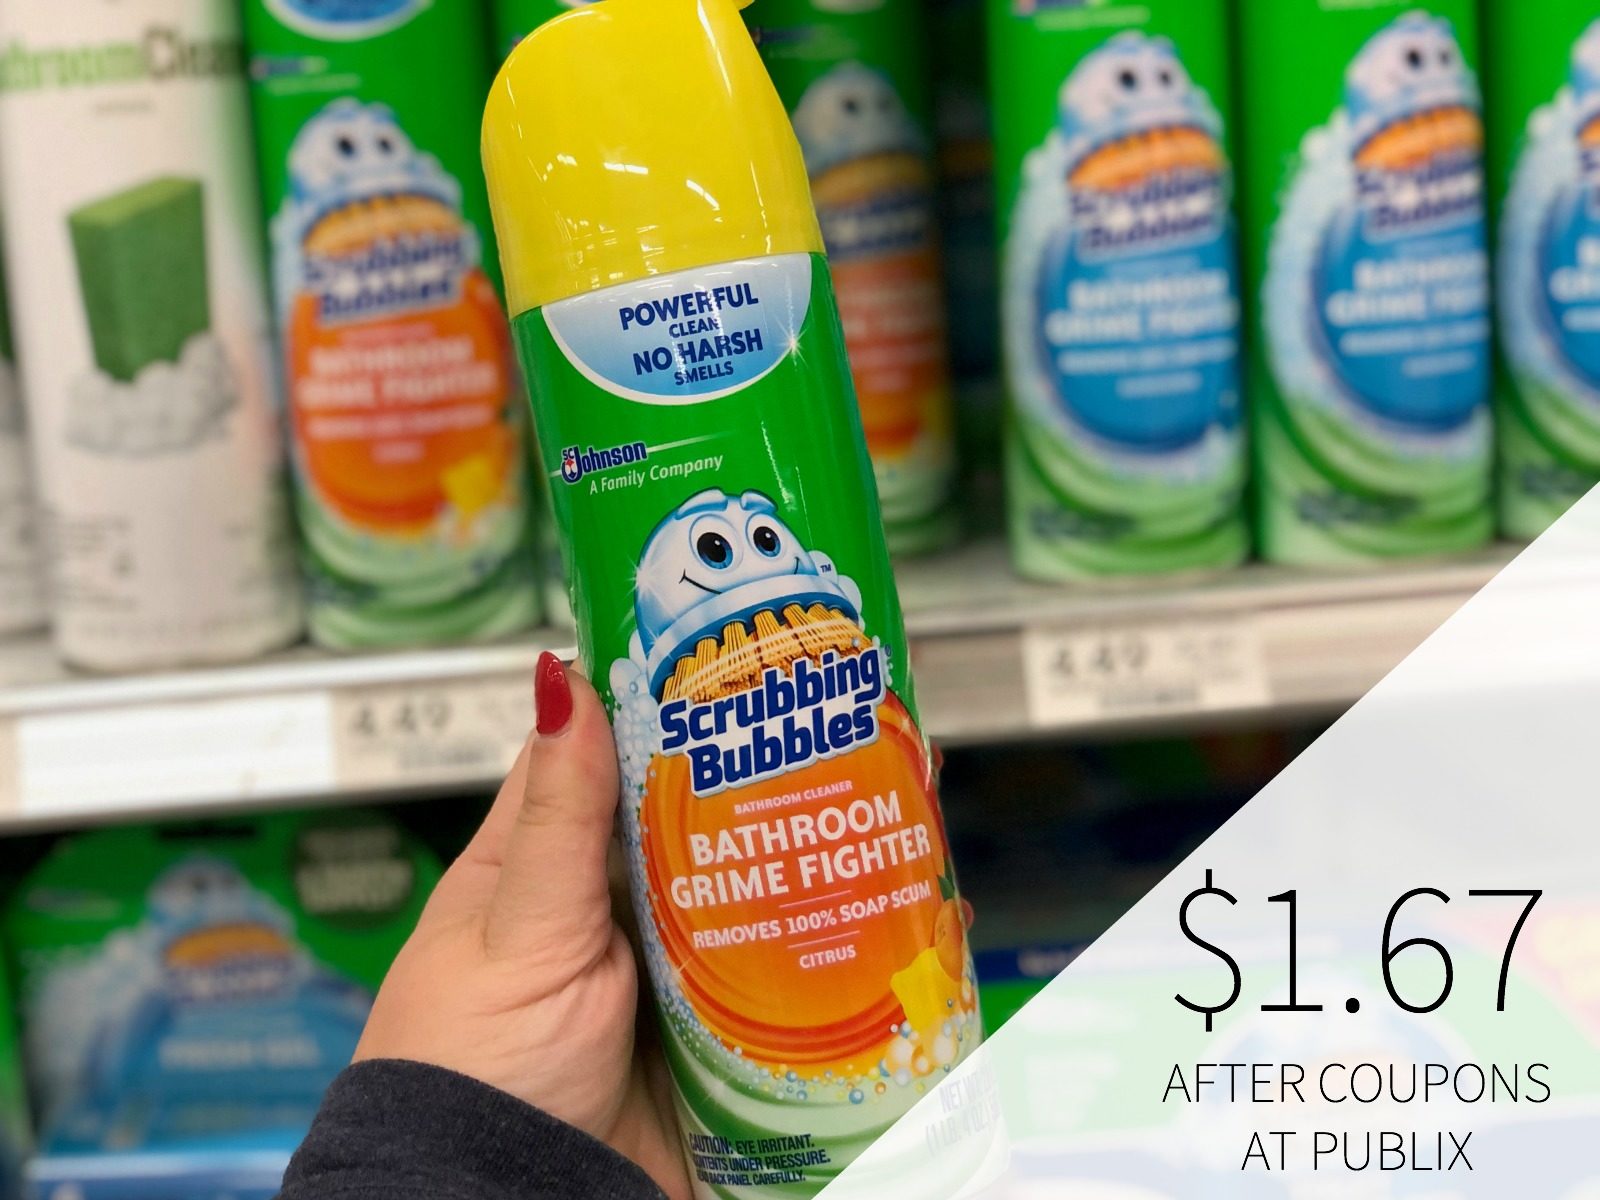 Scrubbing Bubbles Products Only $2.50 At Publix on I Heart Publix 2